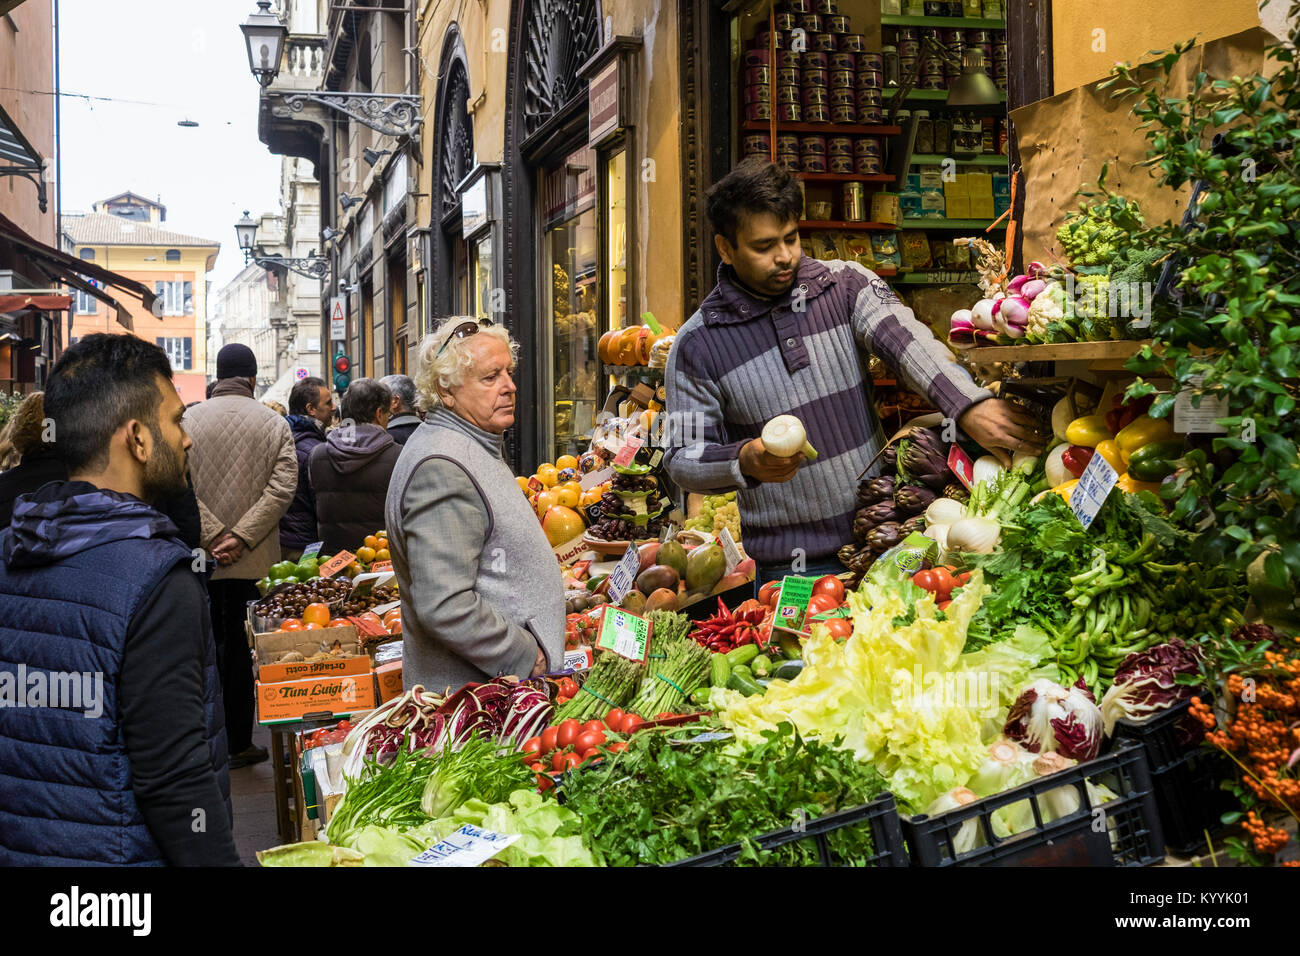 Market stall in Bologna, Italy selling fruit and vegetables Stock Photo